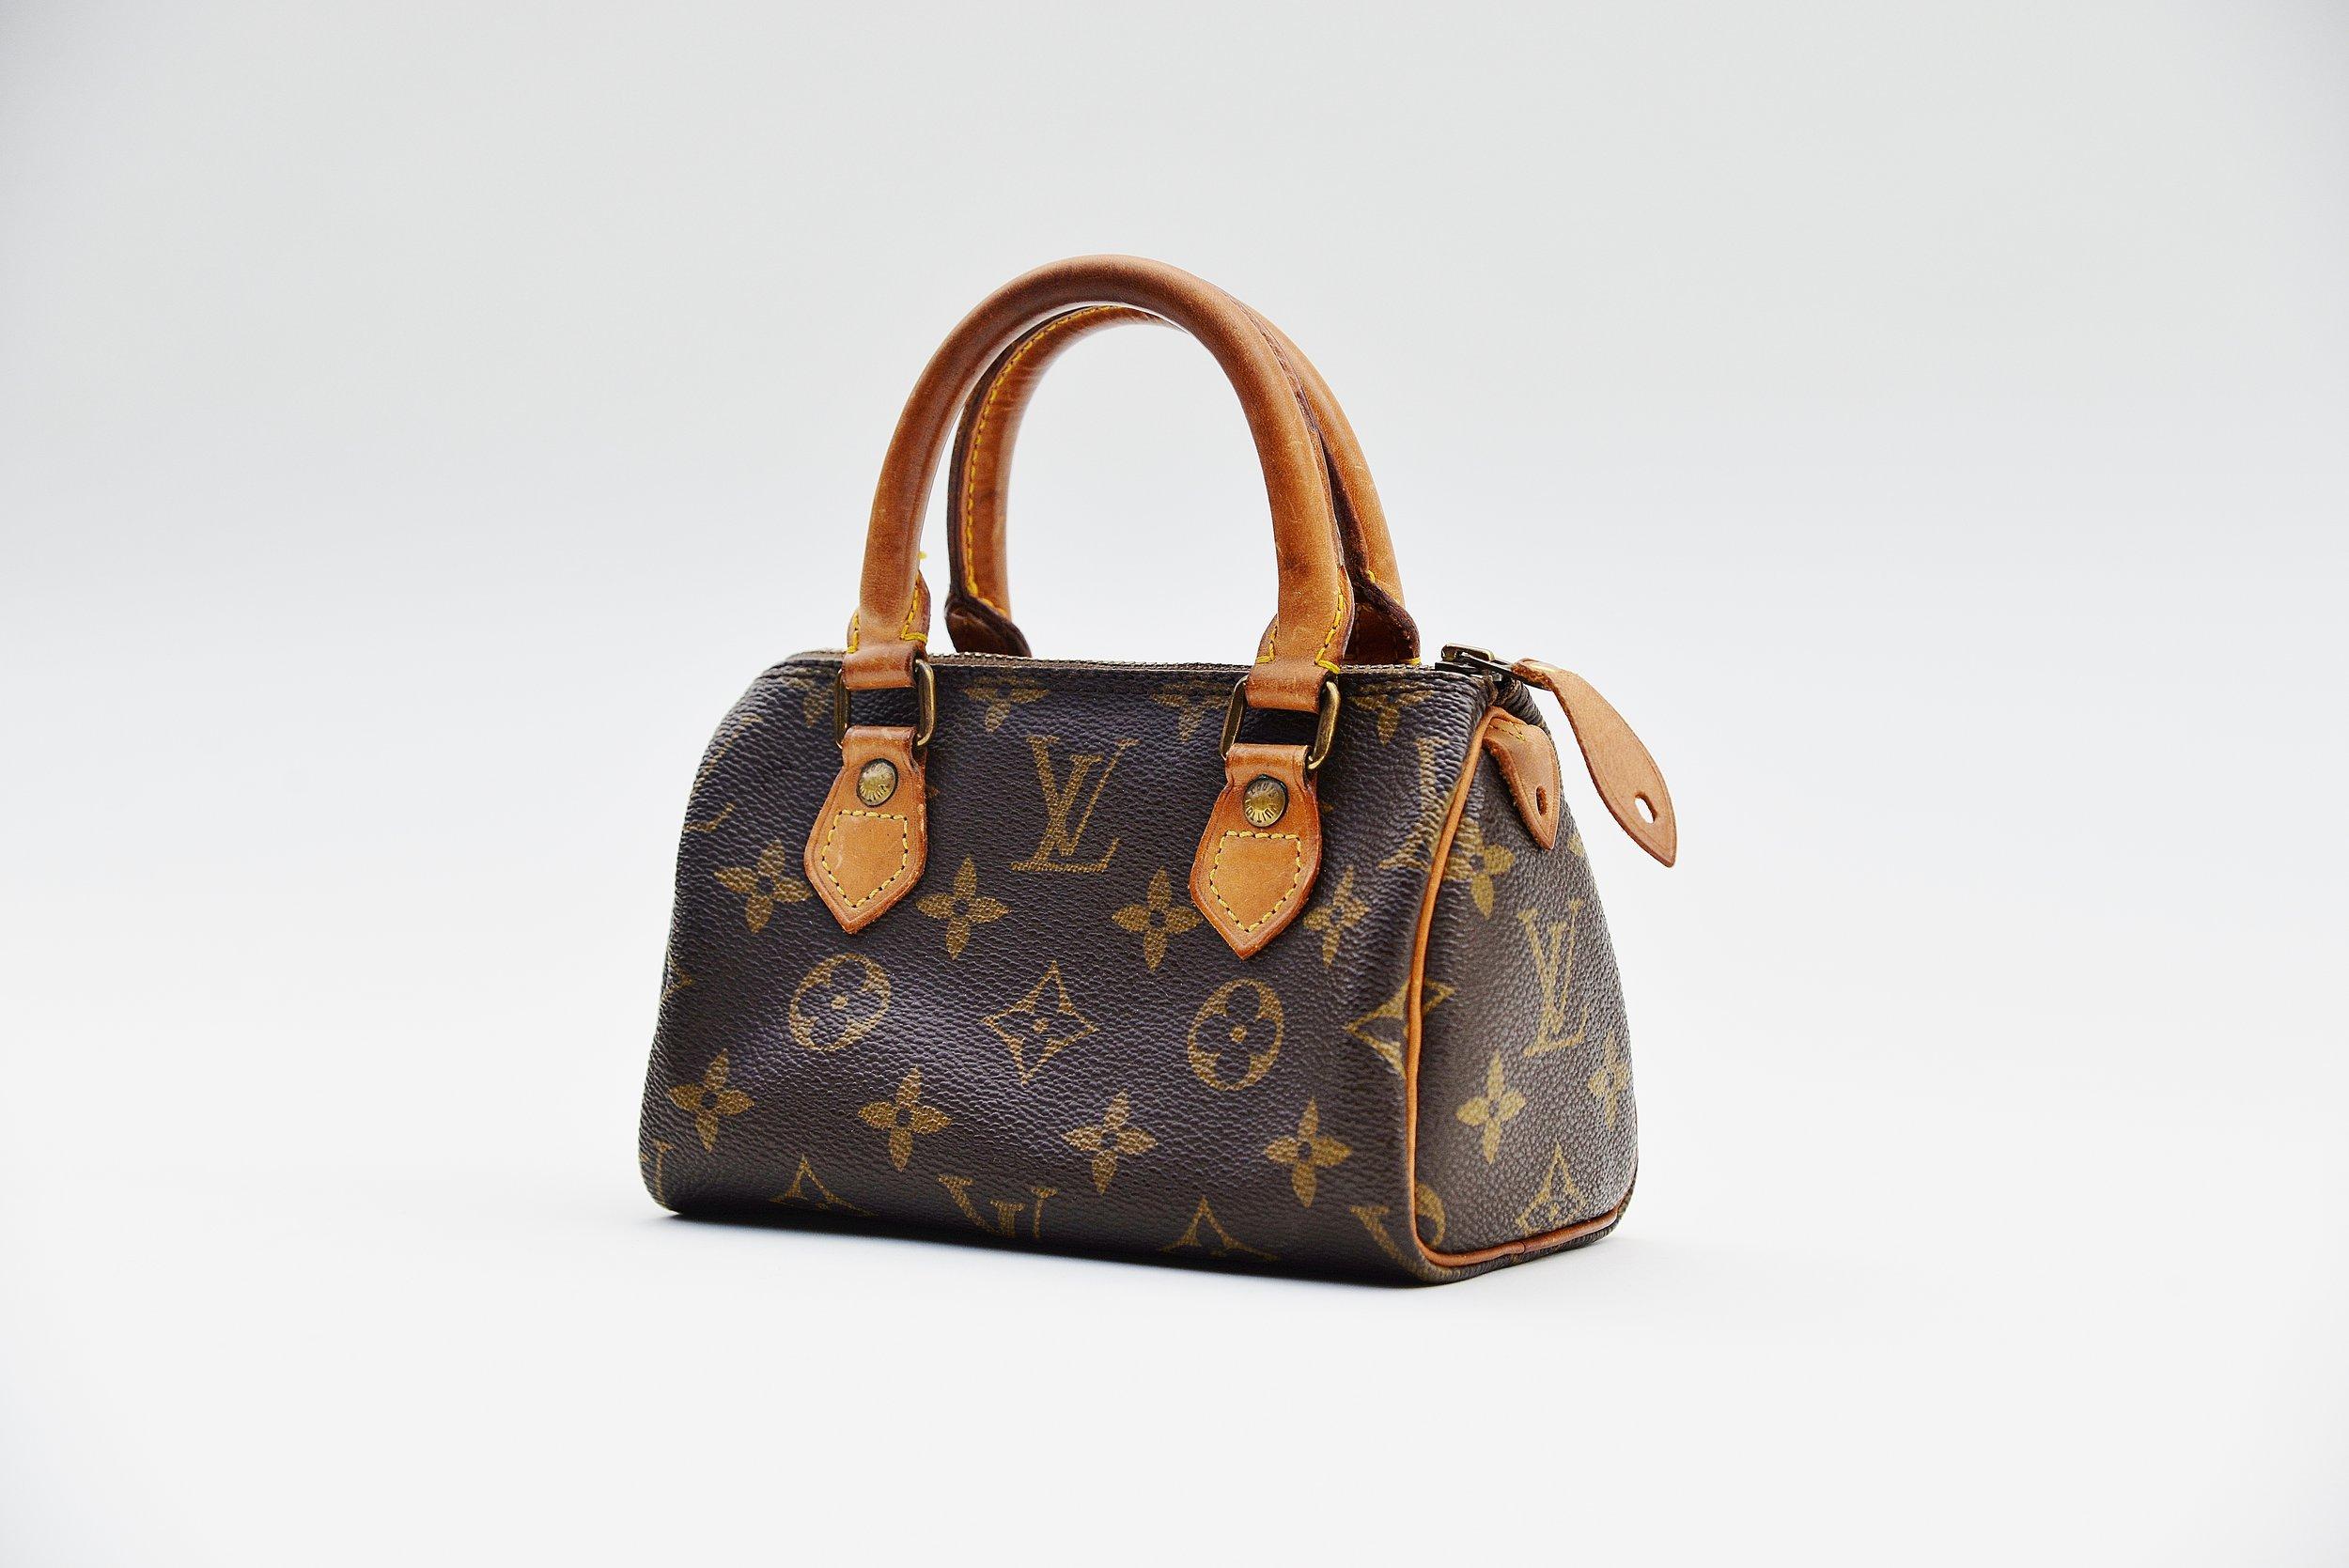 From the collection of Savineti we offer this Louis Vuitton Mini Speey:
-	Brand: Louis Vuitton
-	Model: Mini Speedy
-	Year: 1980
-	Condition: good
-	Materials: monogram canvas with leather handles
-       Length of the handle: 6.5cm
We at Savineti